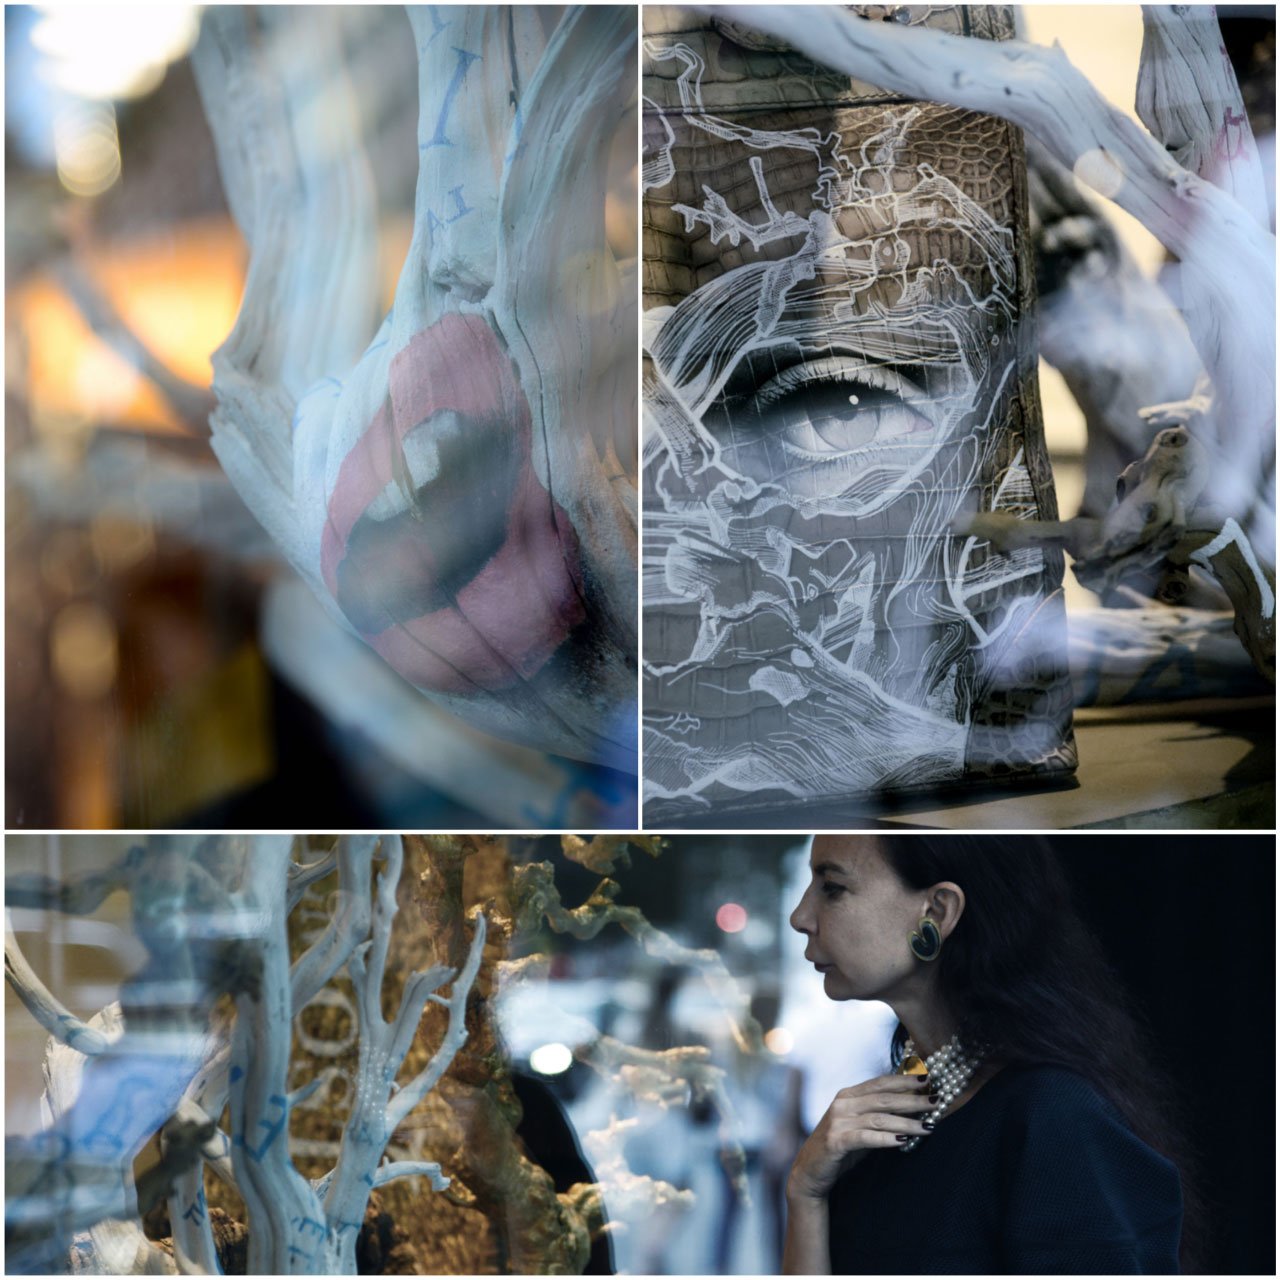 Tiziana Serretta in front of the window of HERITAGE AUCTIONS on Park Avenue, New York. Photographs by Javier Alejandro.